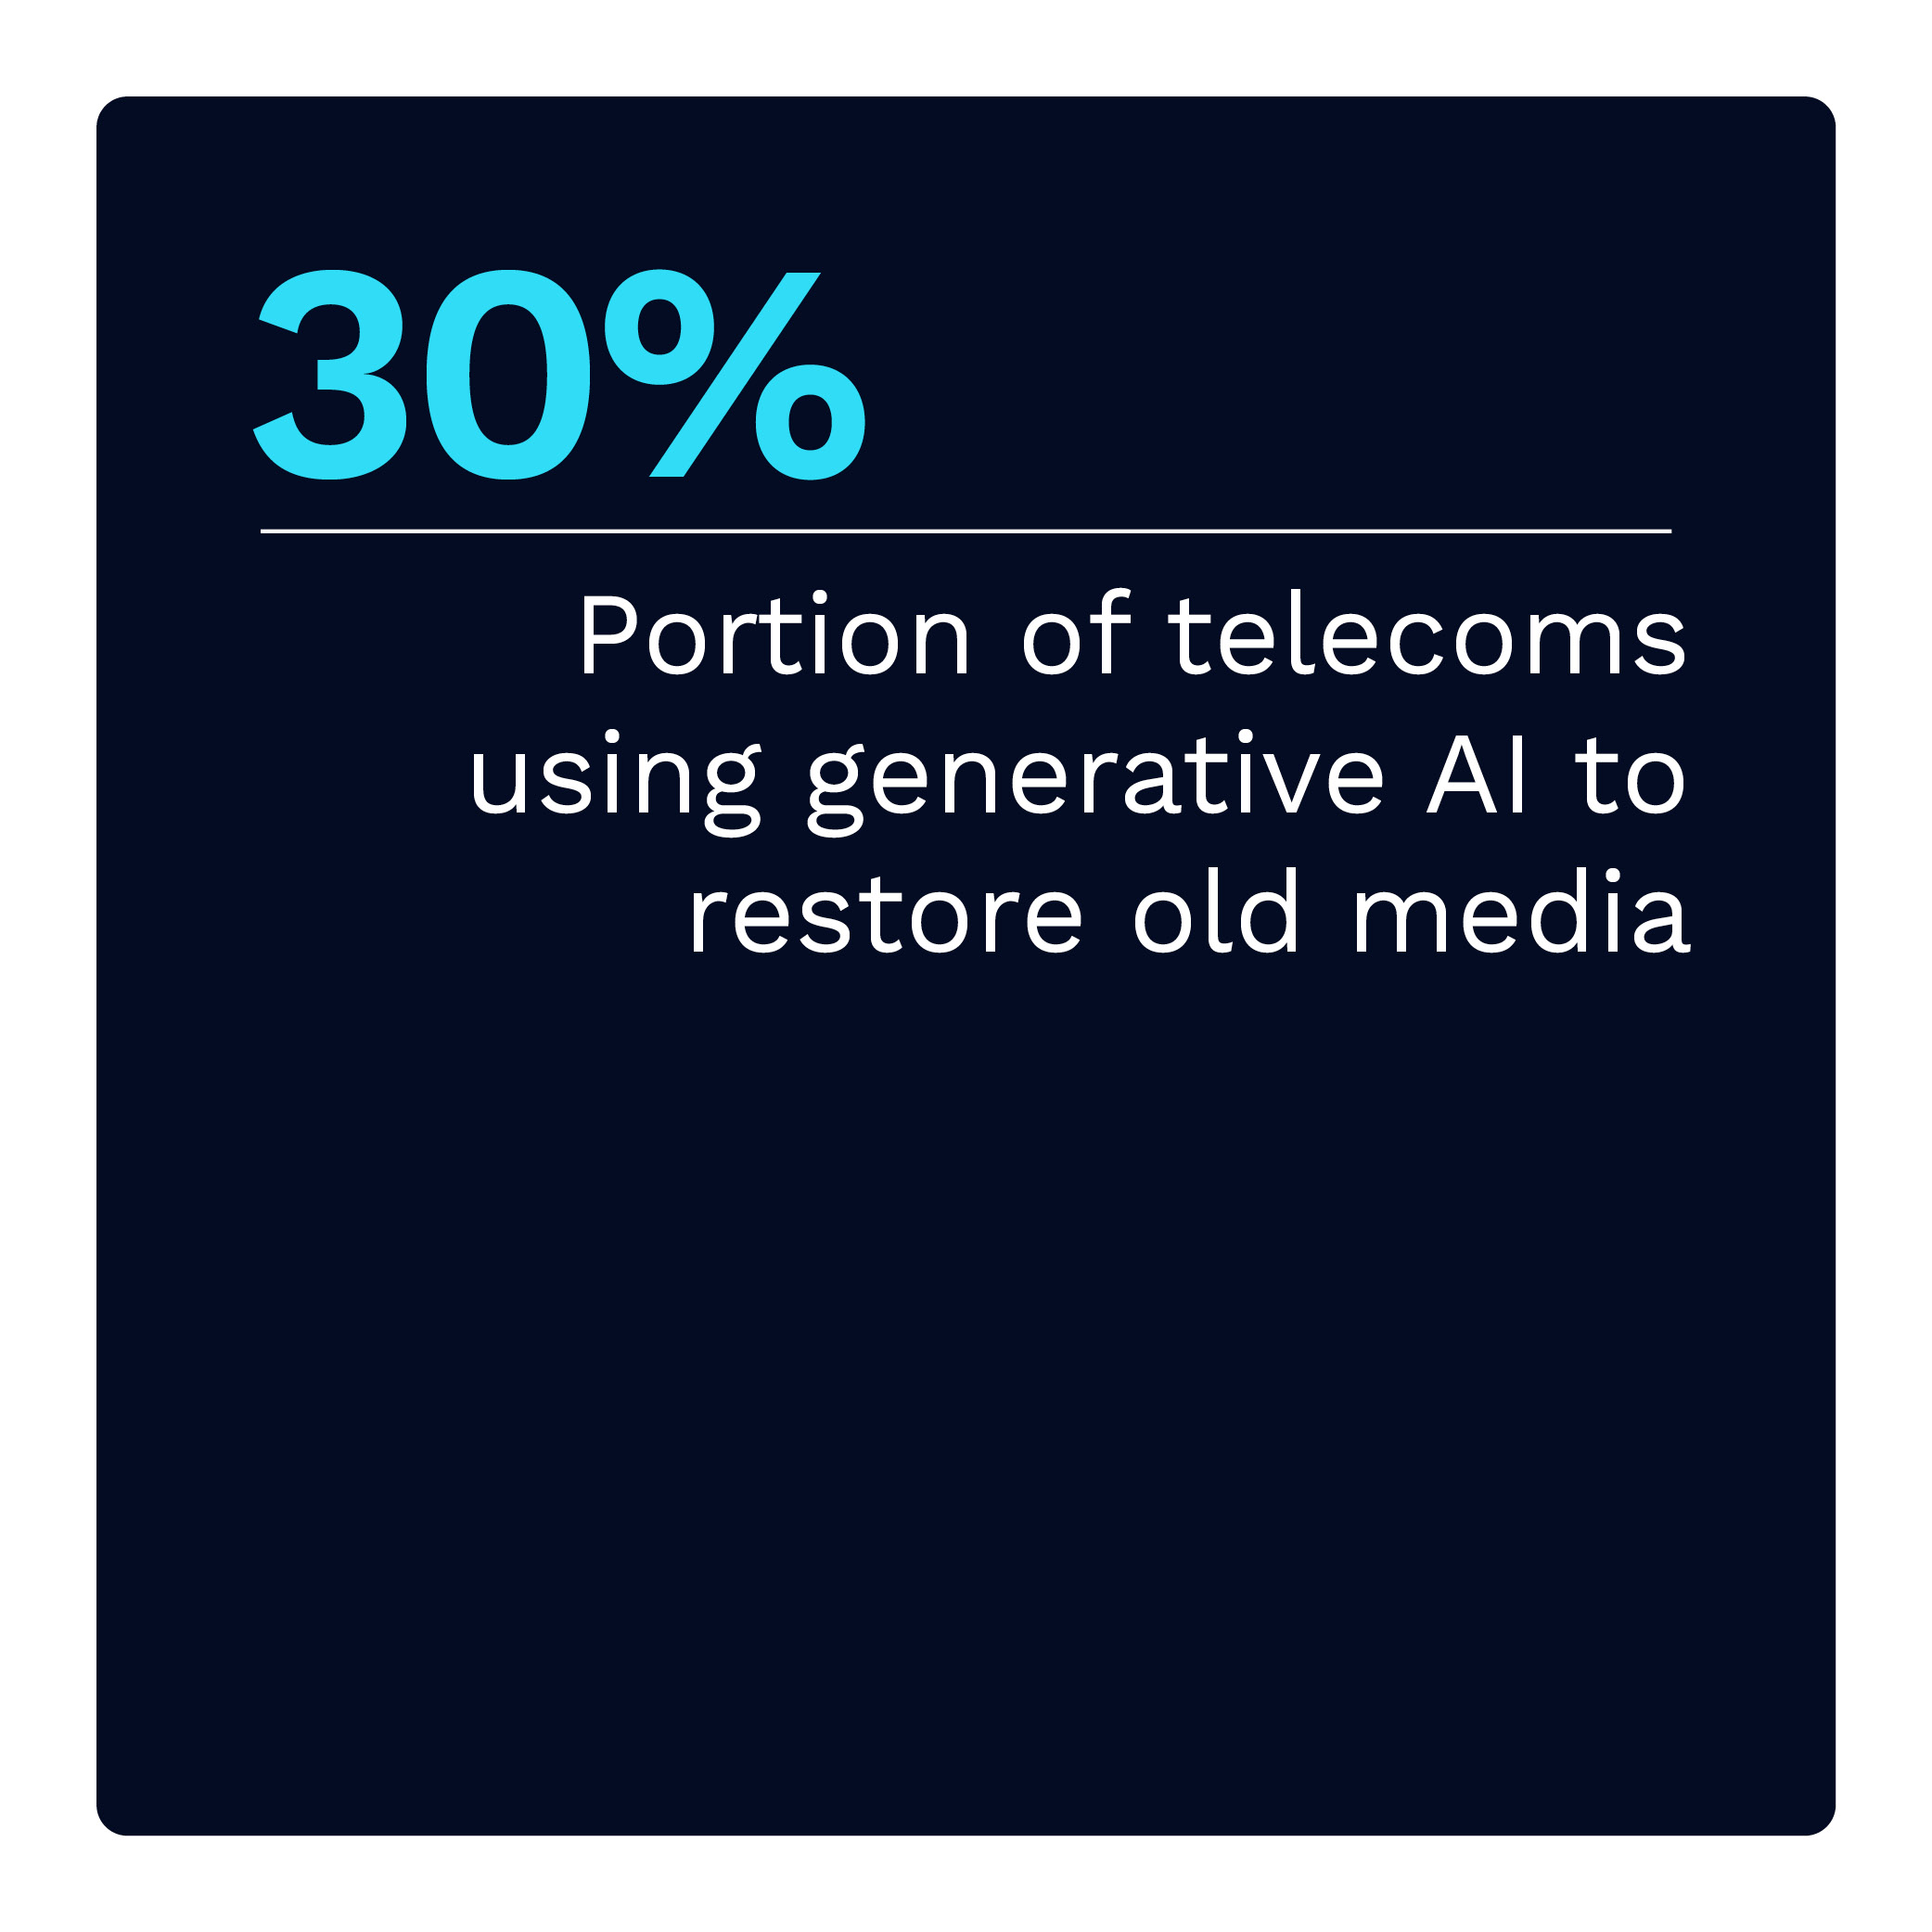 30%: Portion of telecoms using generative AI to restore old media